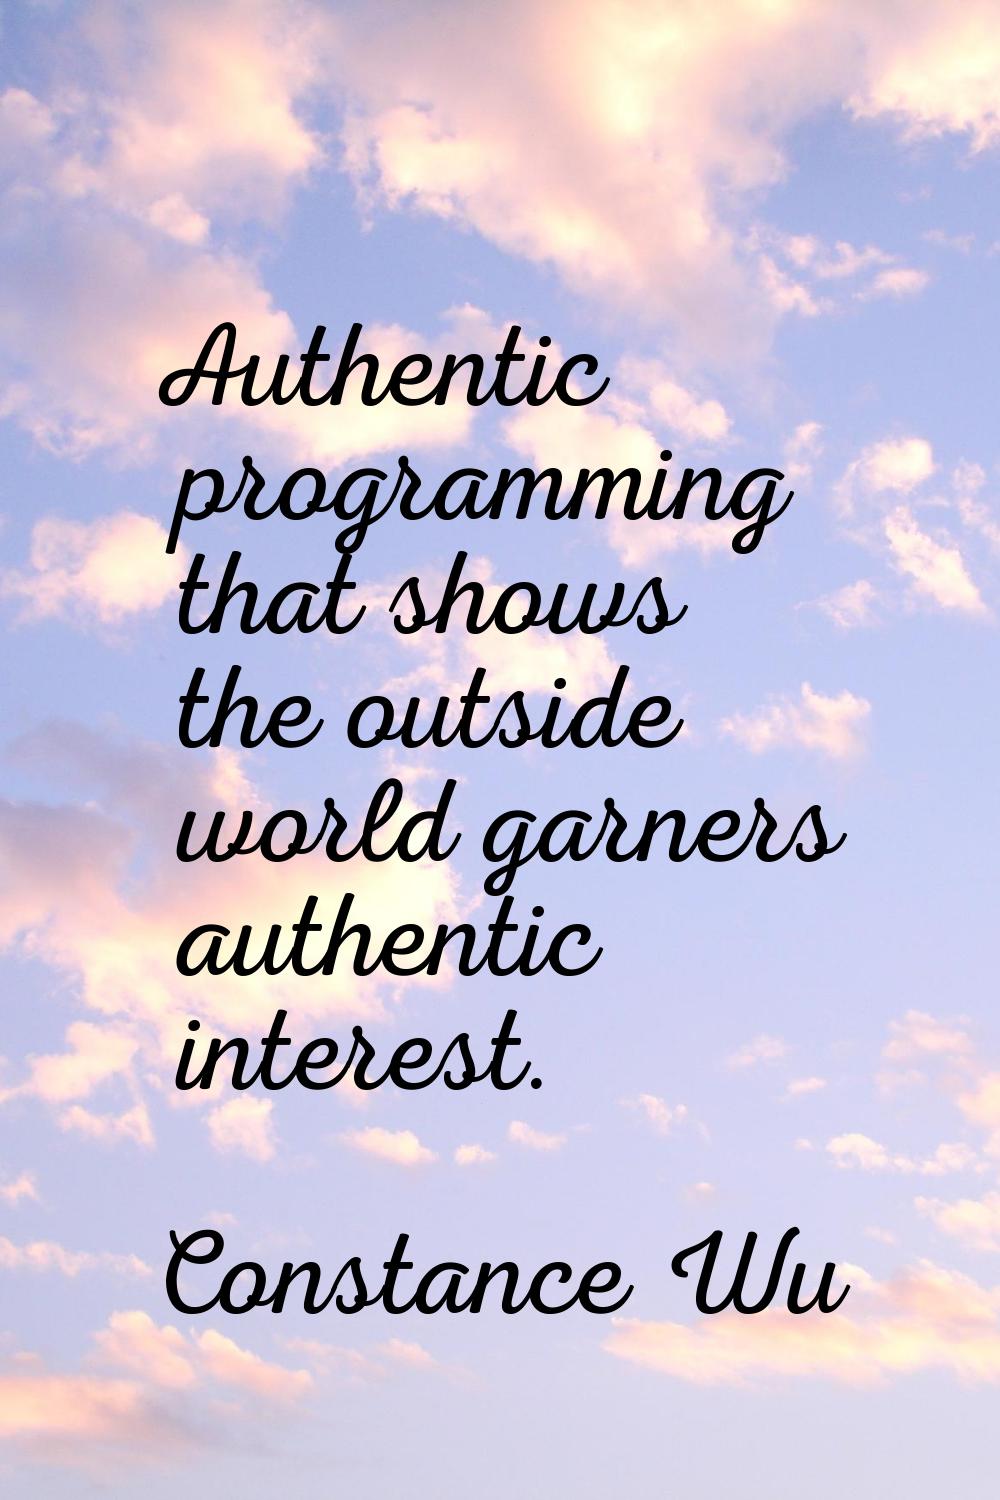 Authentic programming that shows the outside world garners authentic interest.